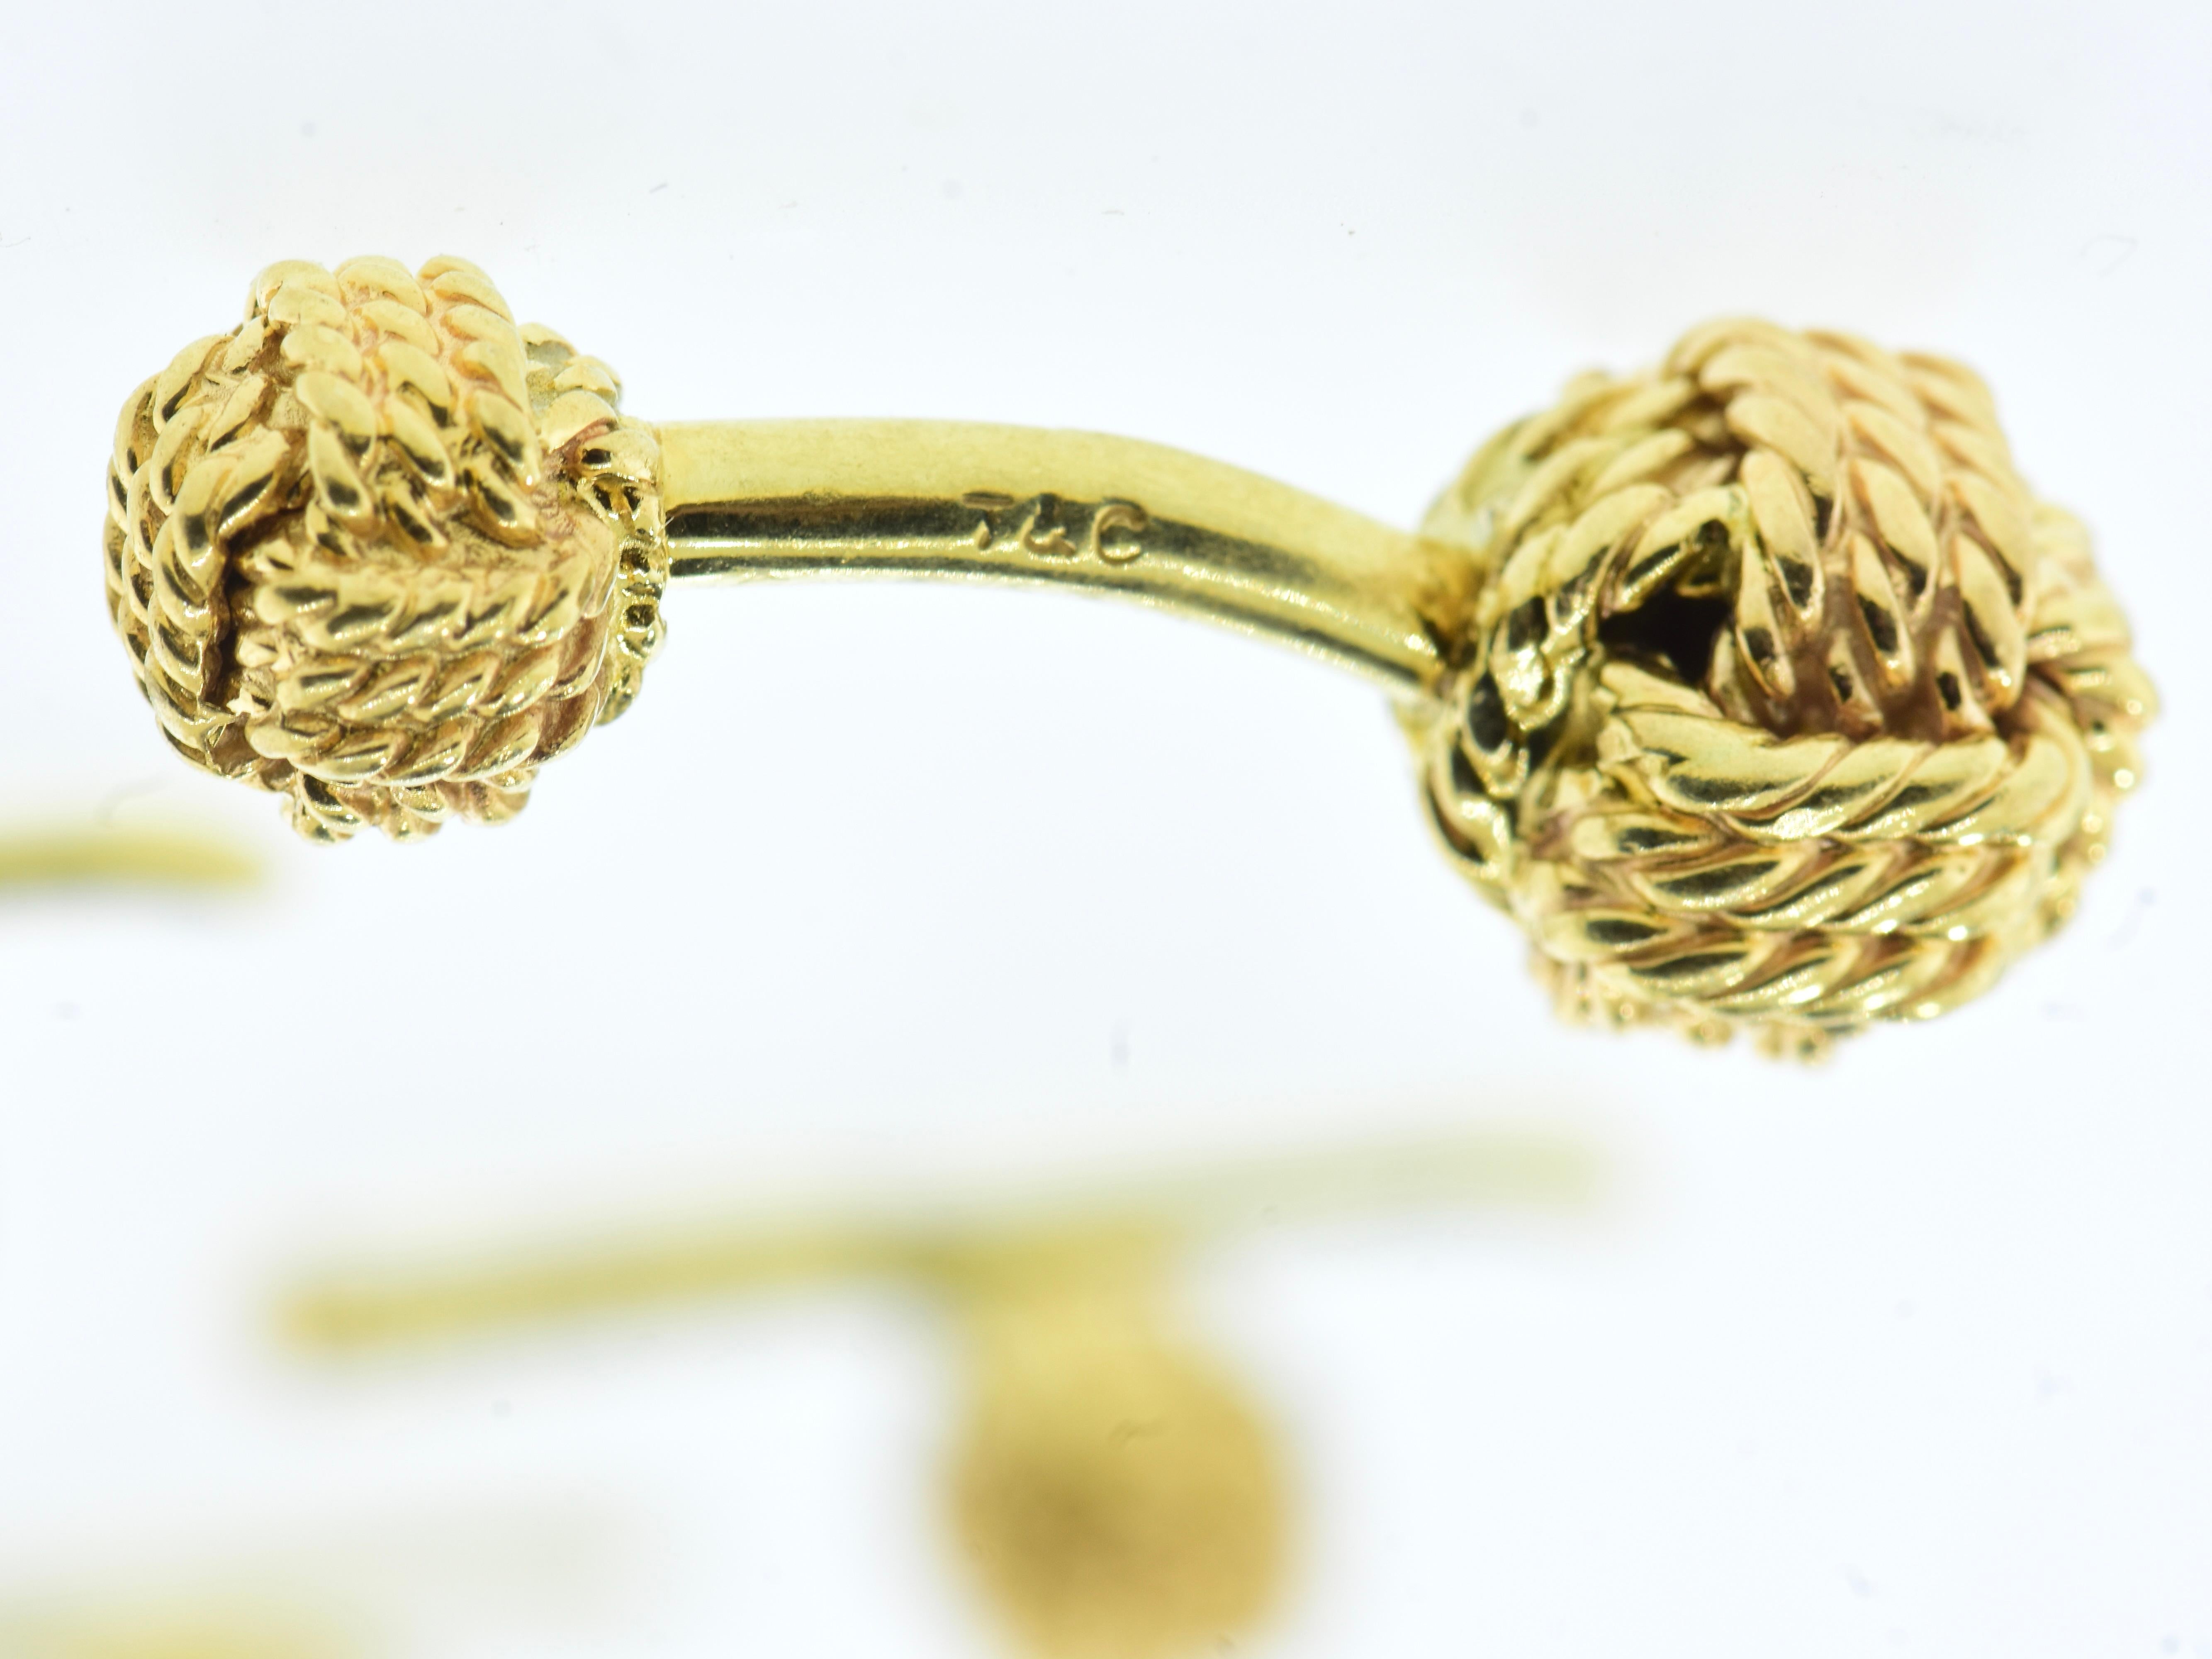 Tiffany & Co. Yellow Gold Cuff & Stud Set in a Love Knot Motif, Vintage, c. 1970 For Sale 2